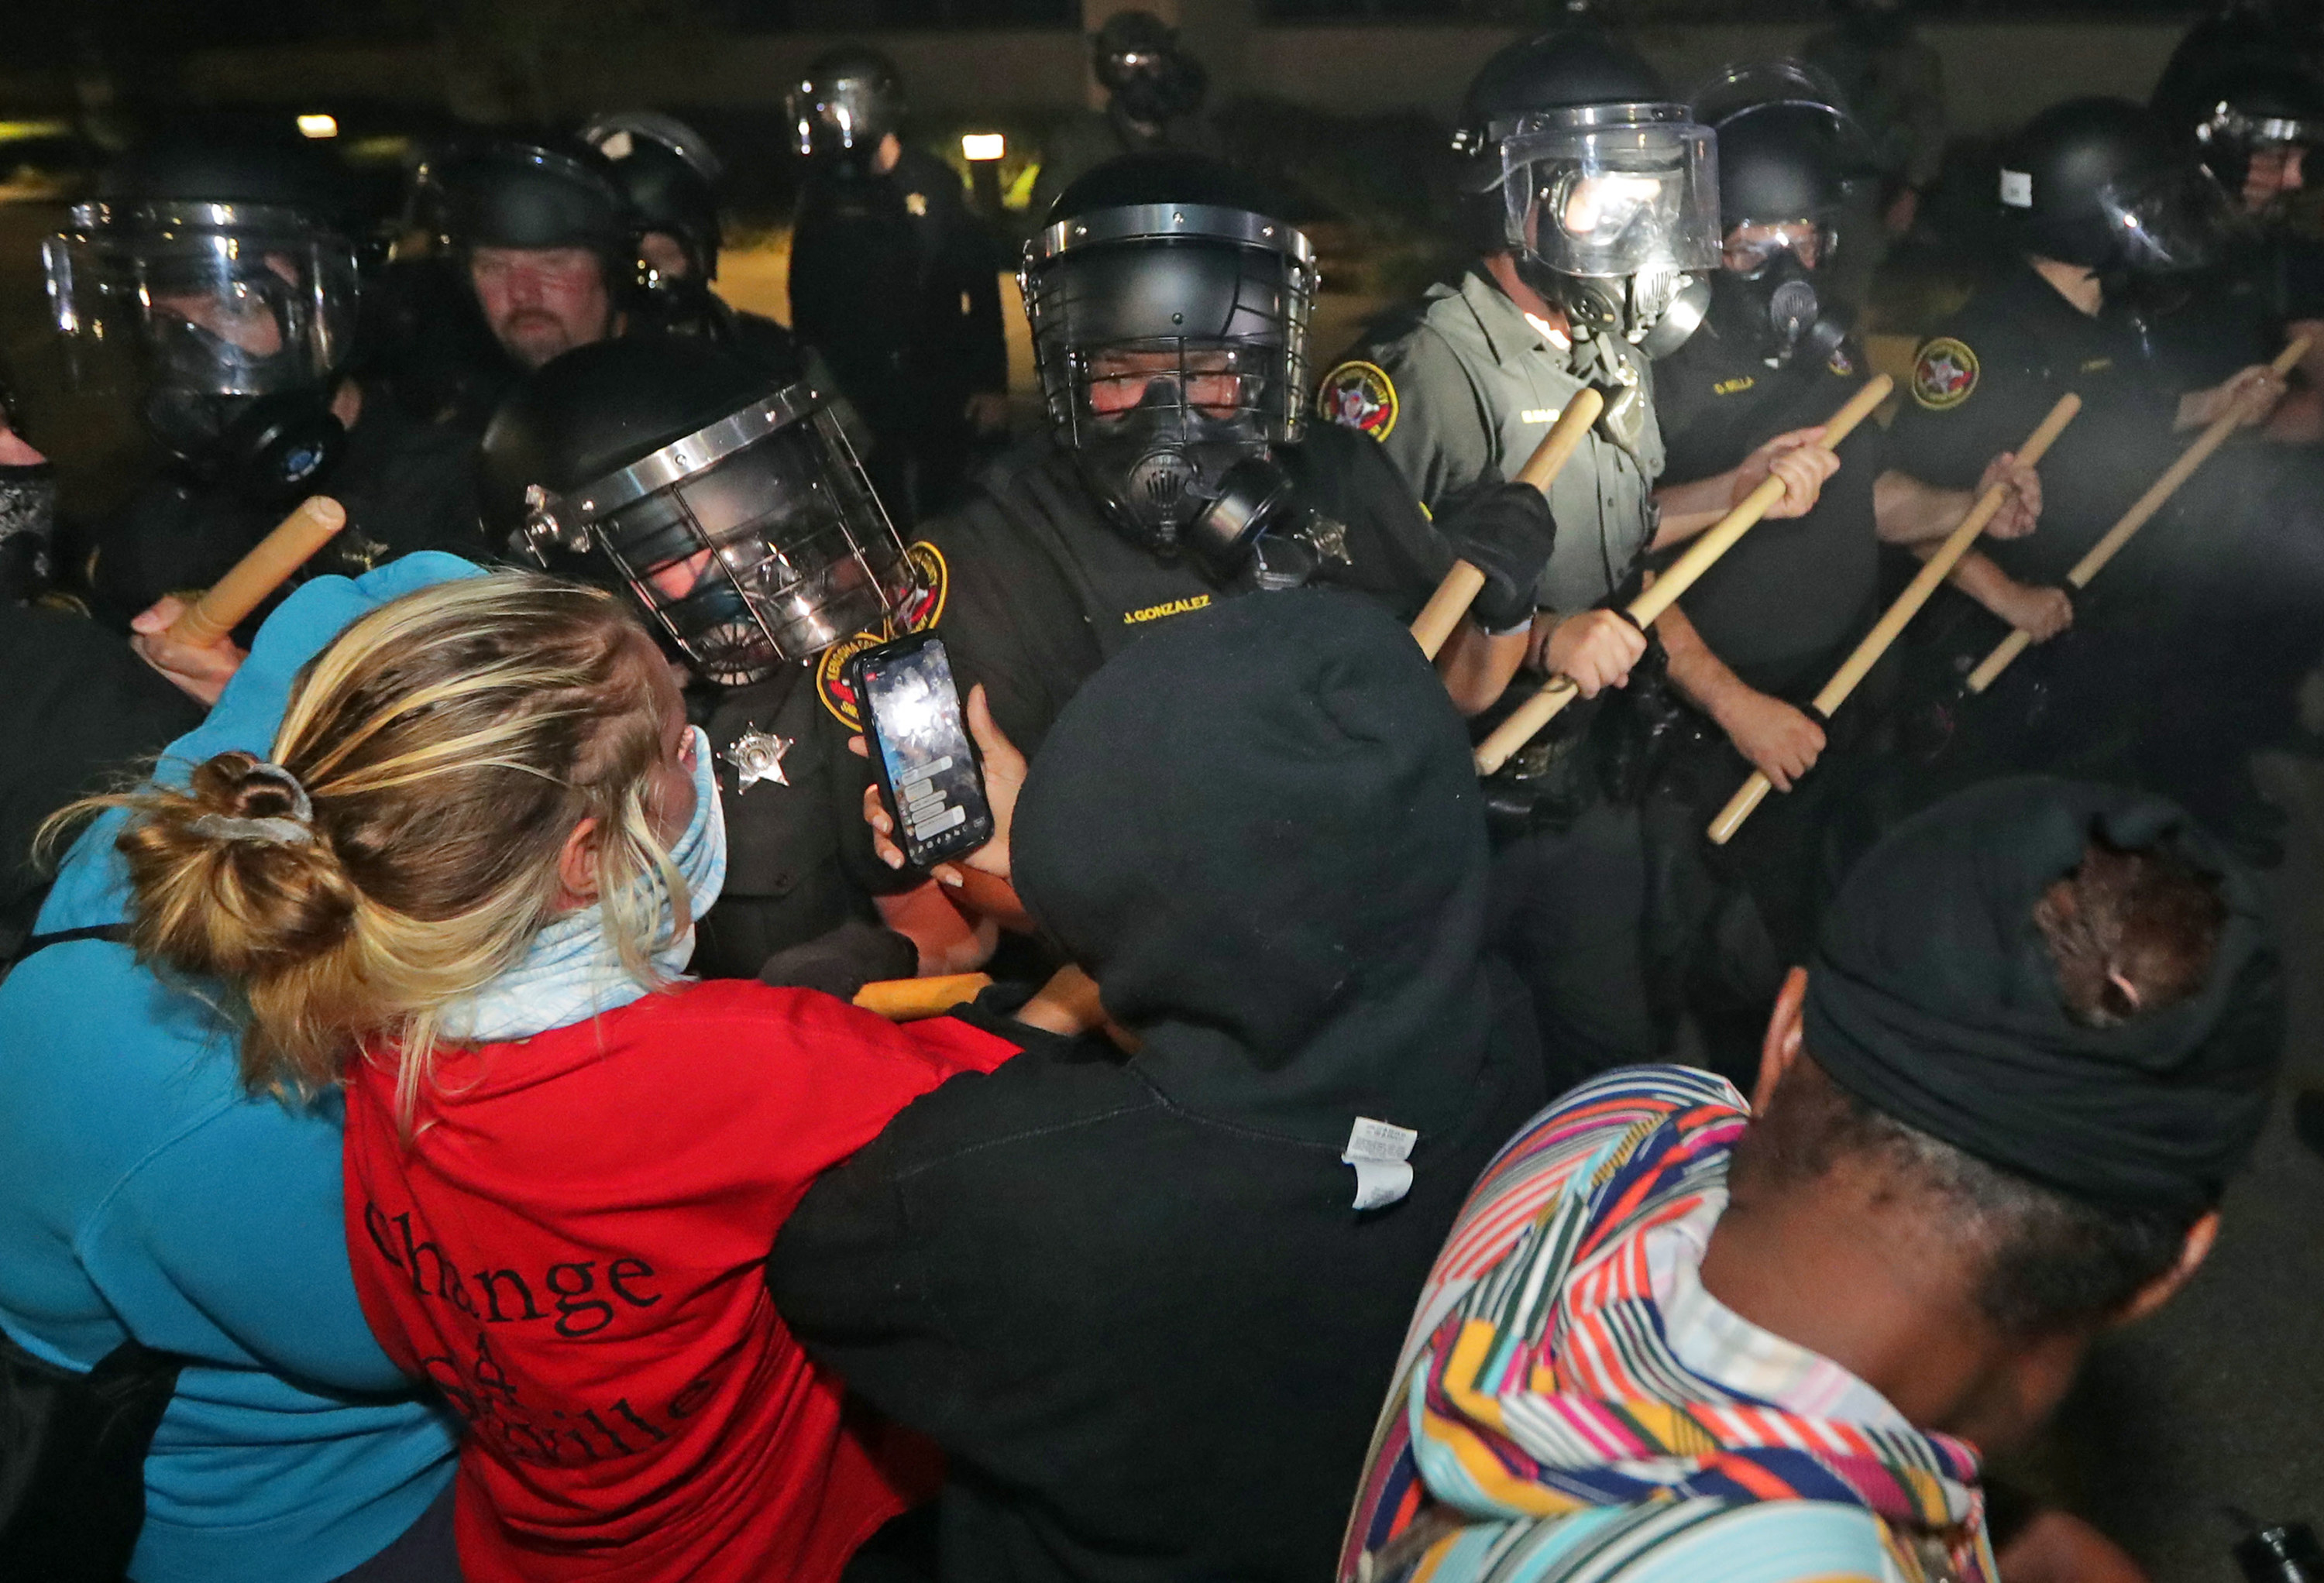 Police use batons to push back a crowd